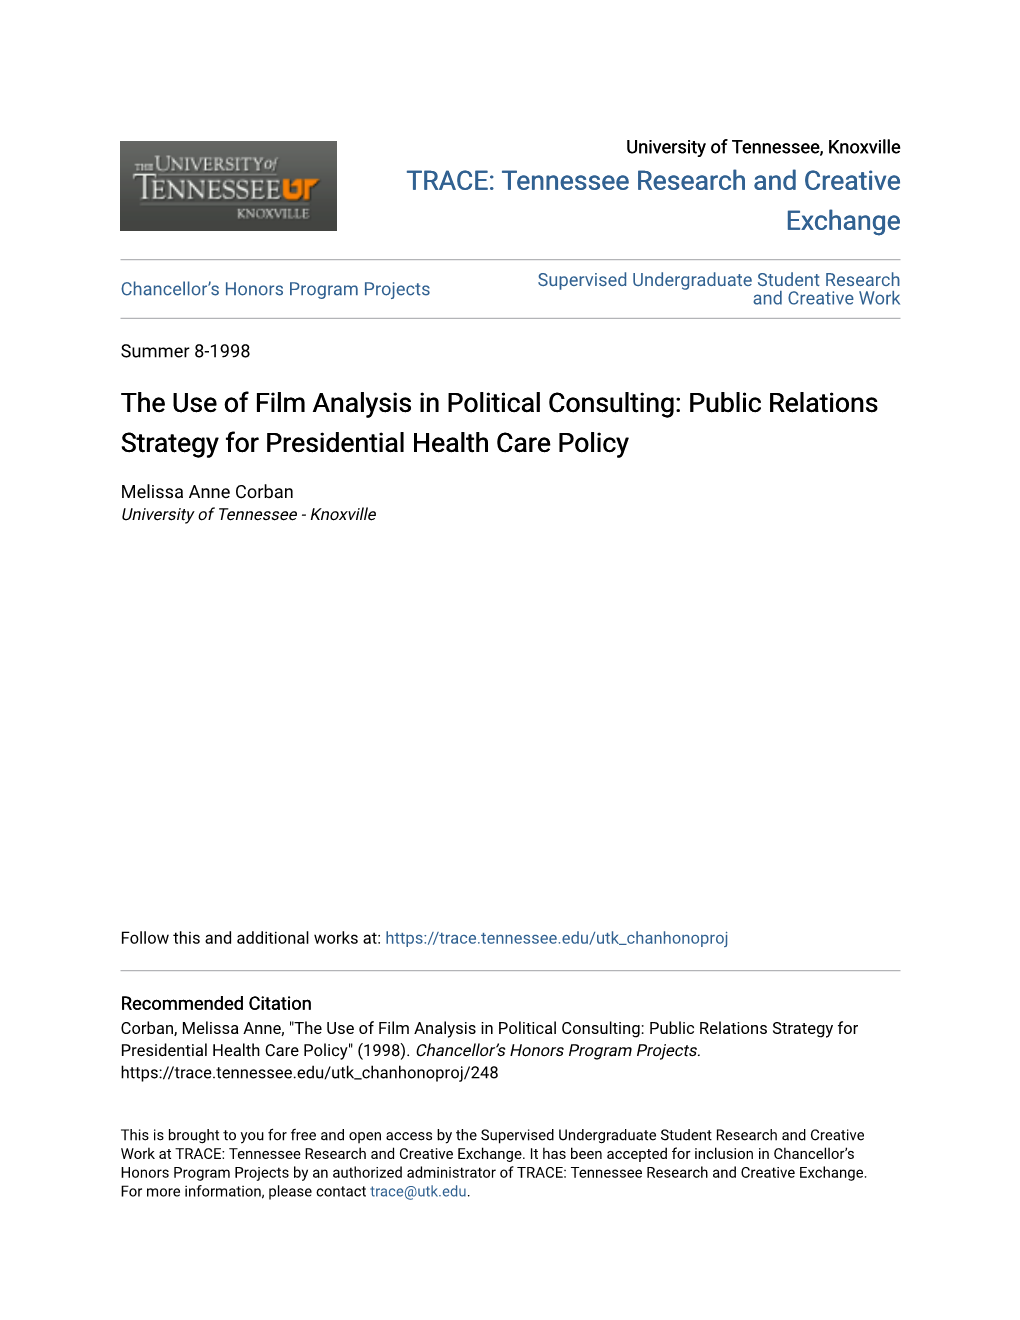 The Use of Film Analysis in Political Consulting: Public Relations Strategy for Presidential Health Care Policy